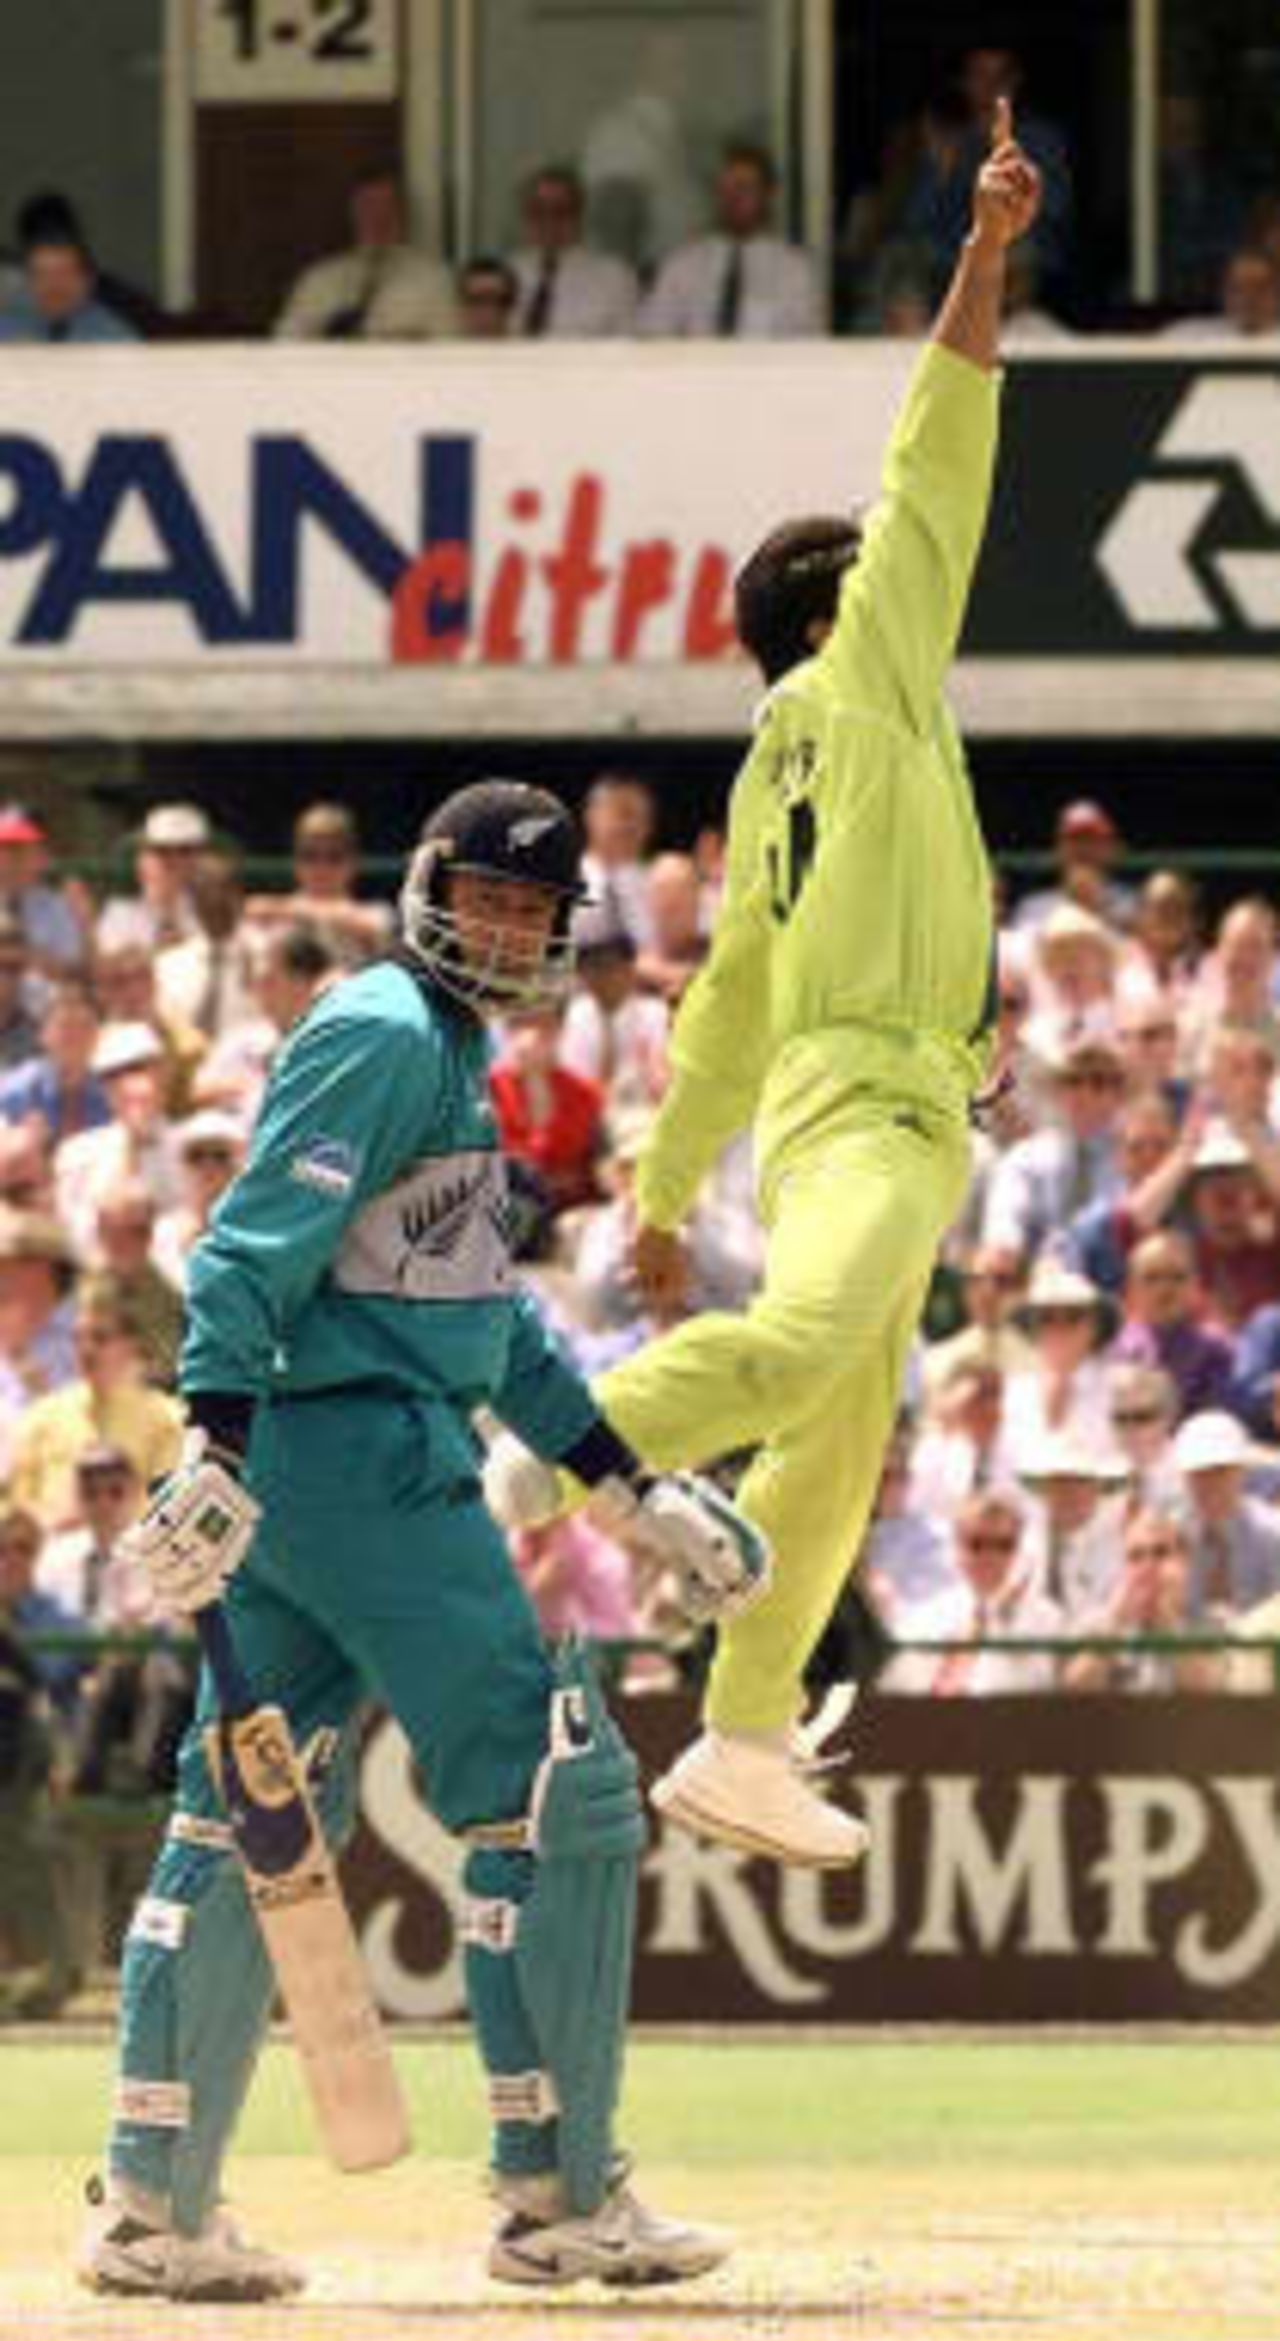 Pakistan's fast bowler Shoaib Akhtar celebrates after taking the wicket of New Zealand's opening batsman Nathan Astle 16 June 1999,  during the semi-final match in the Cricket World Cup at Old Trafford, Manchester.  The final will be at Lords 20 June 1999